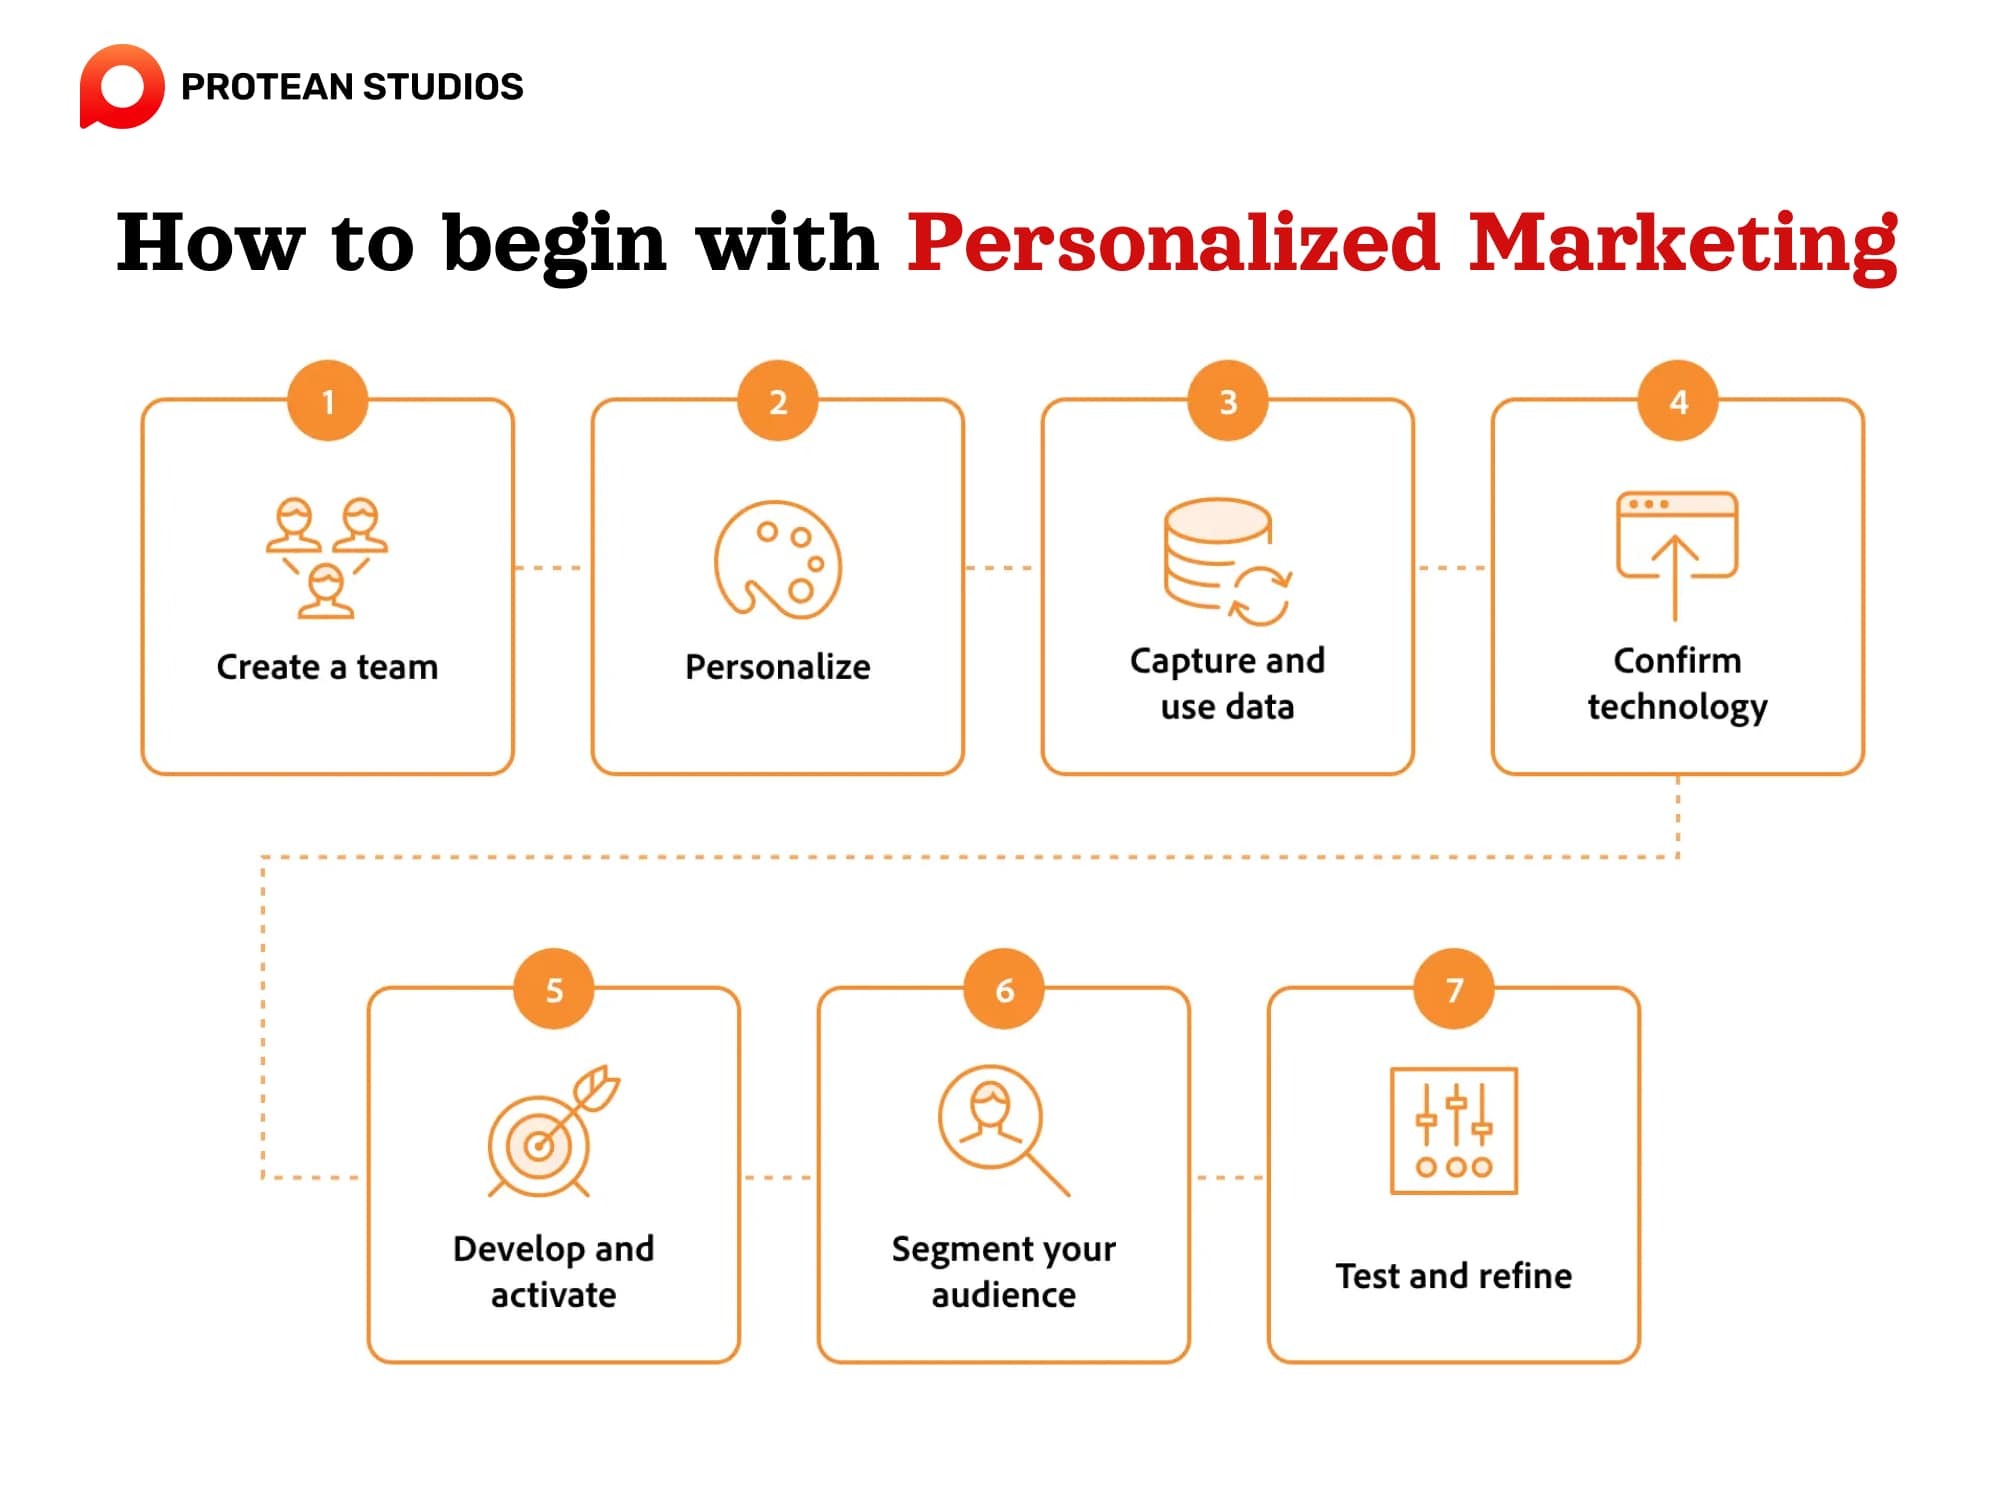 The basic way to build a marketing personalization